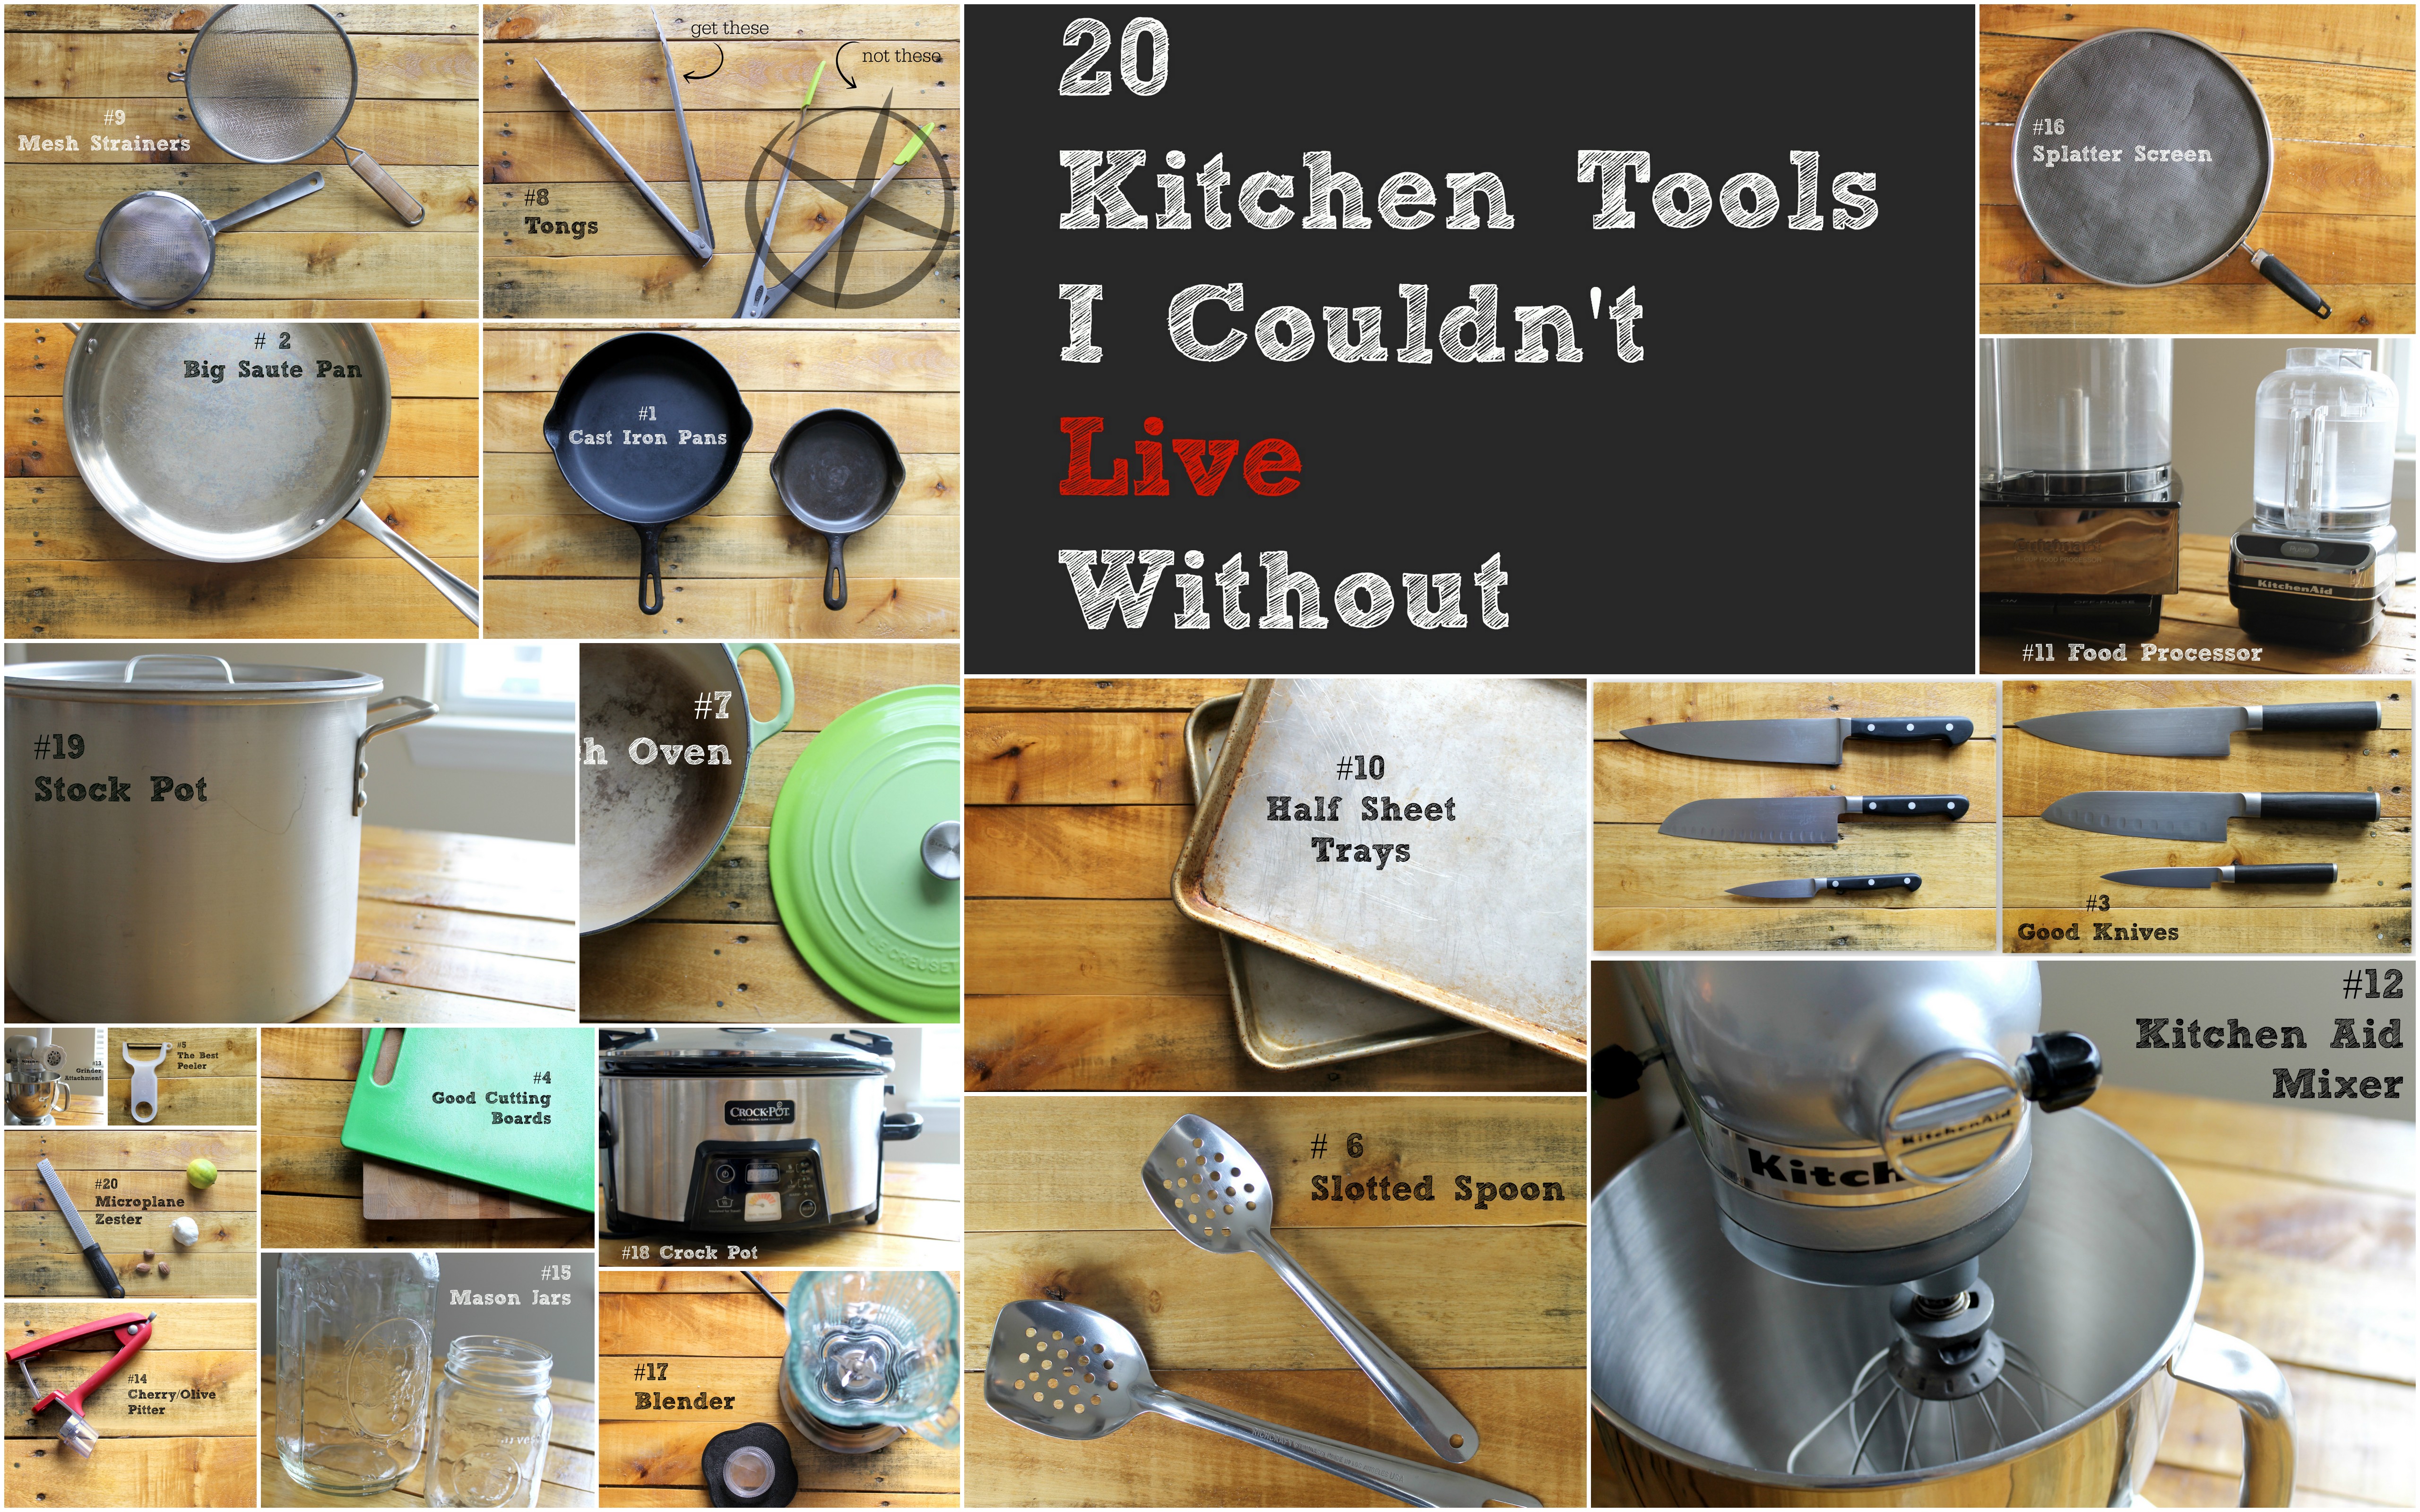 10 kitchen items and over 20 recipes come together in a collection to help  any home cook be successful!